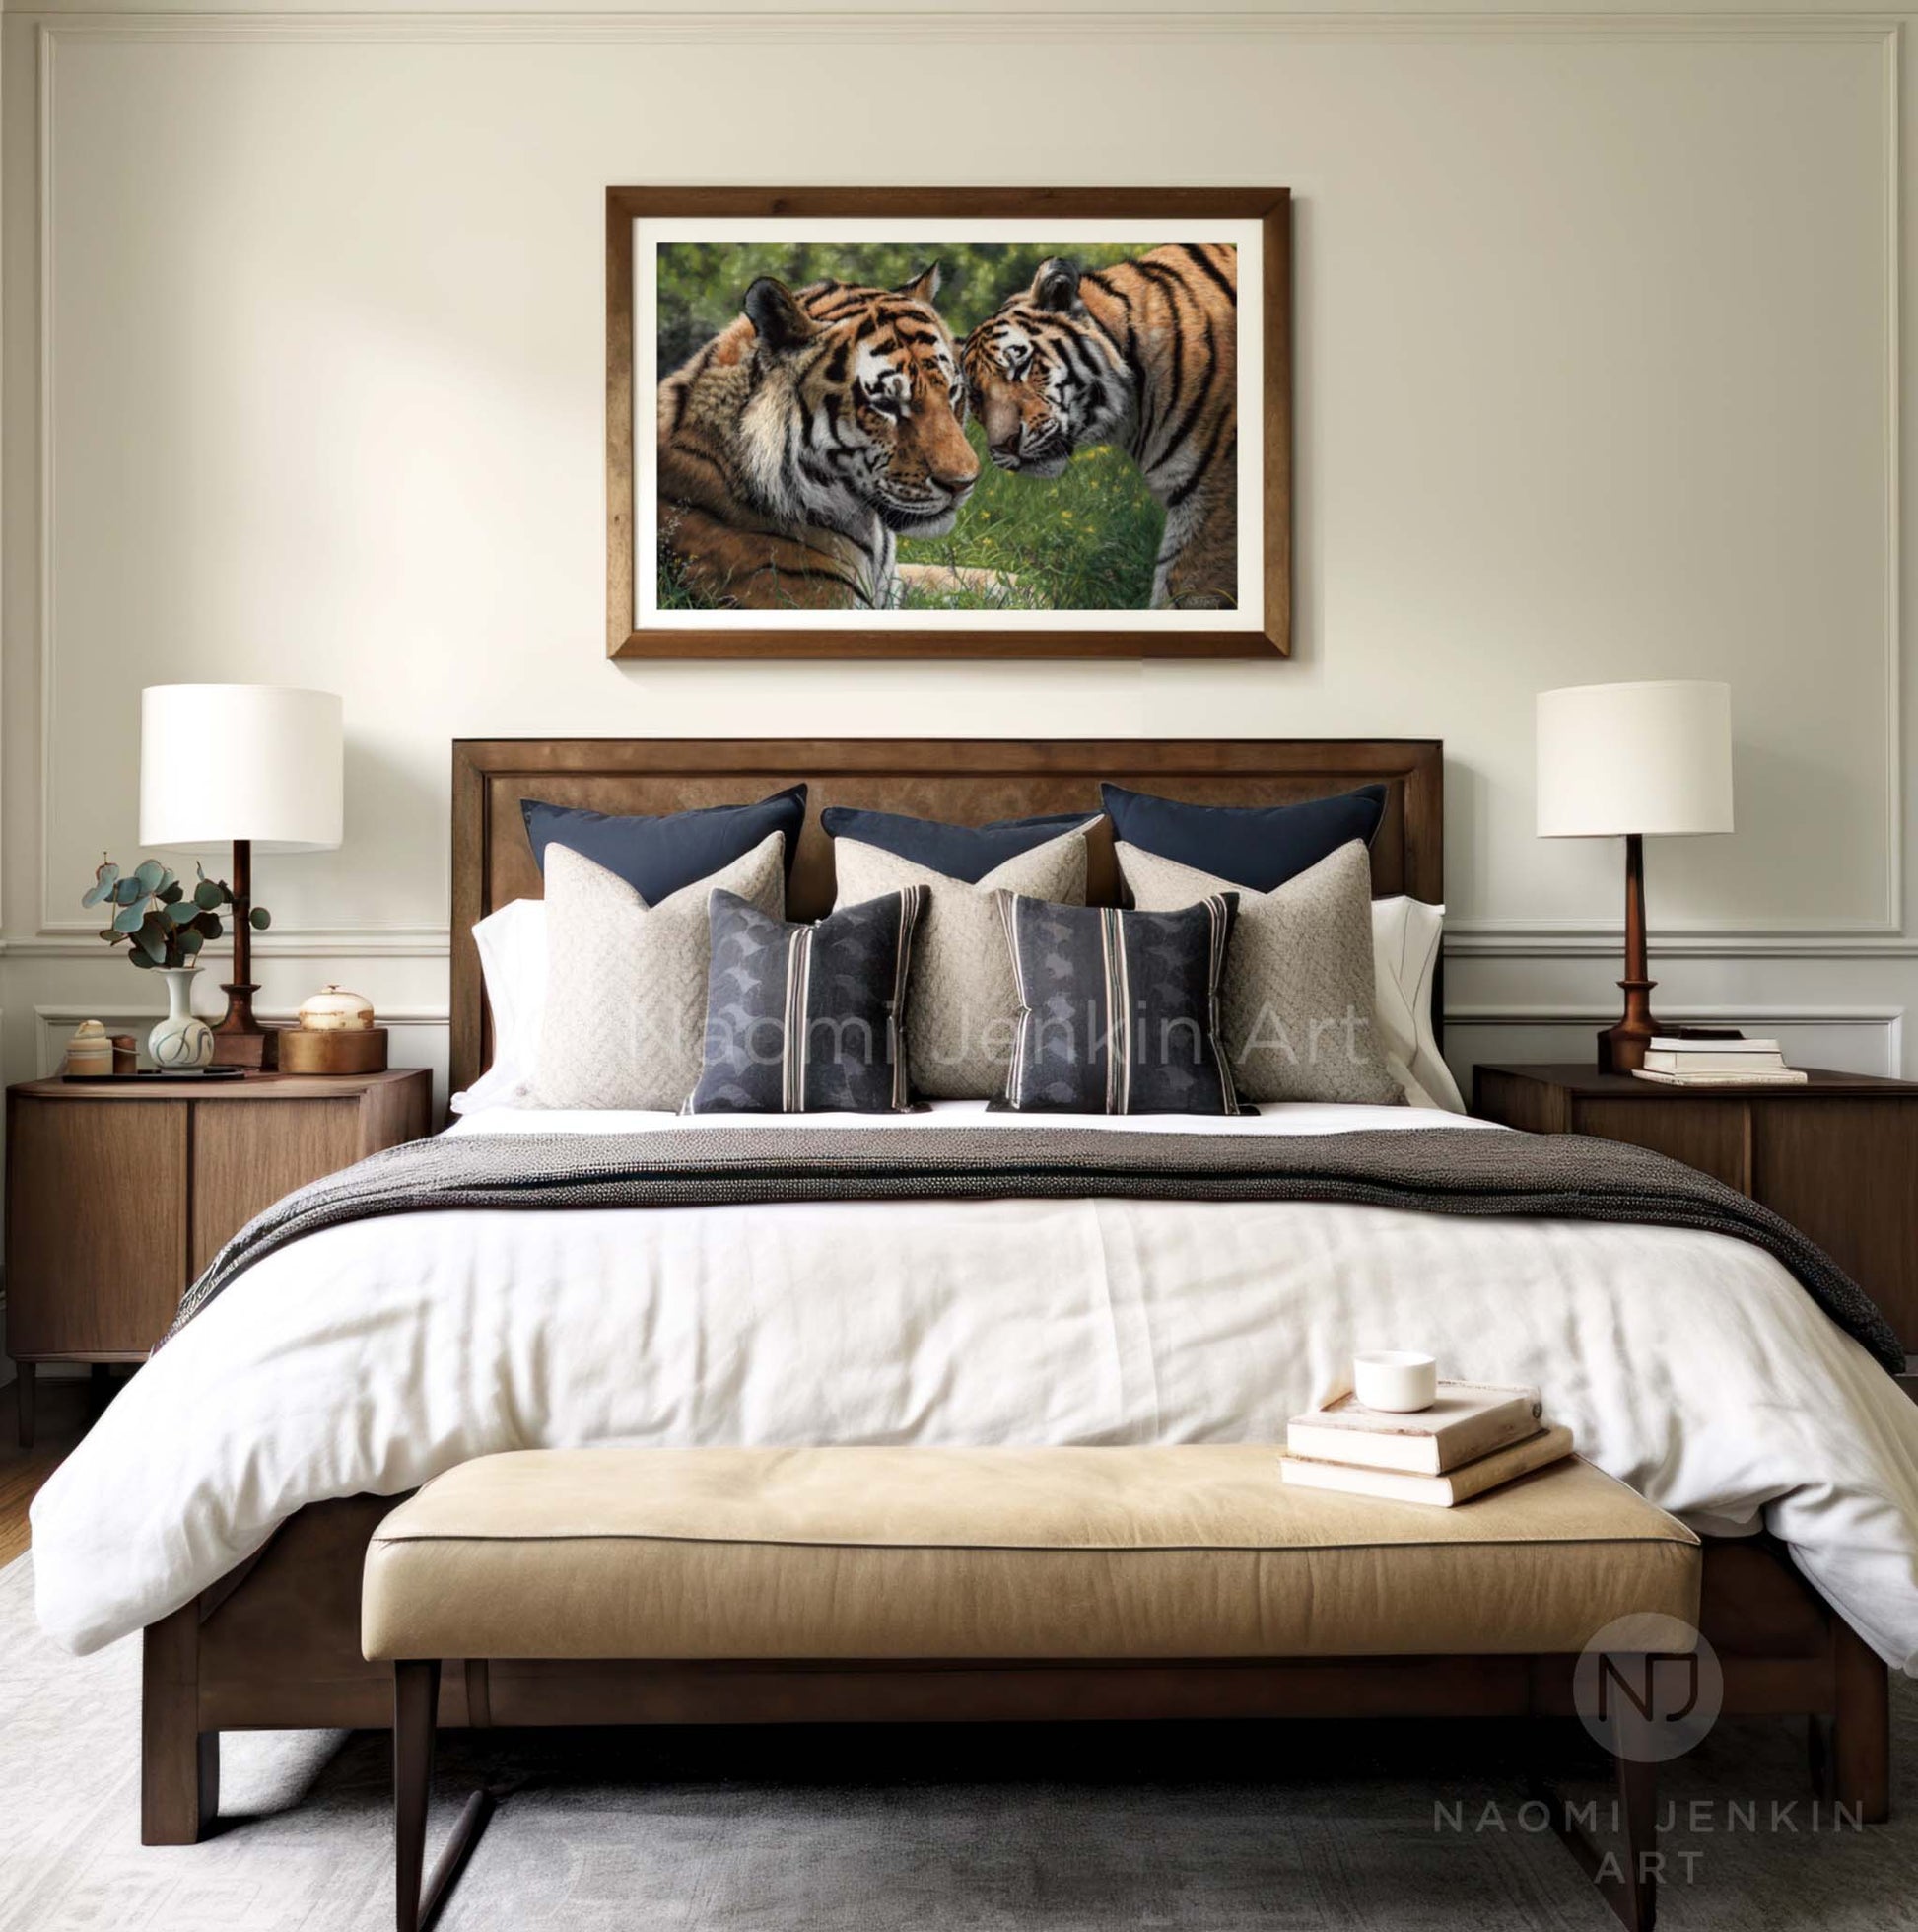 Framed original tiger painting 'Allegiance' in a bedroom setting by Naomi Jenkin Art